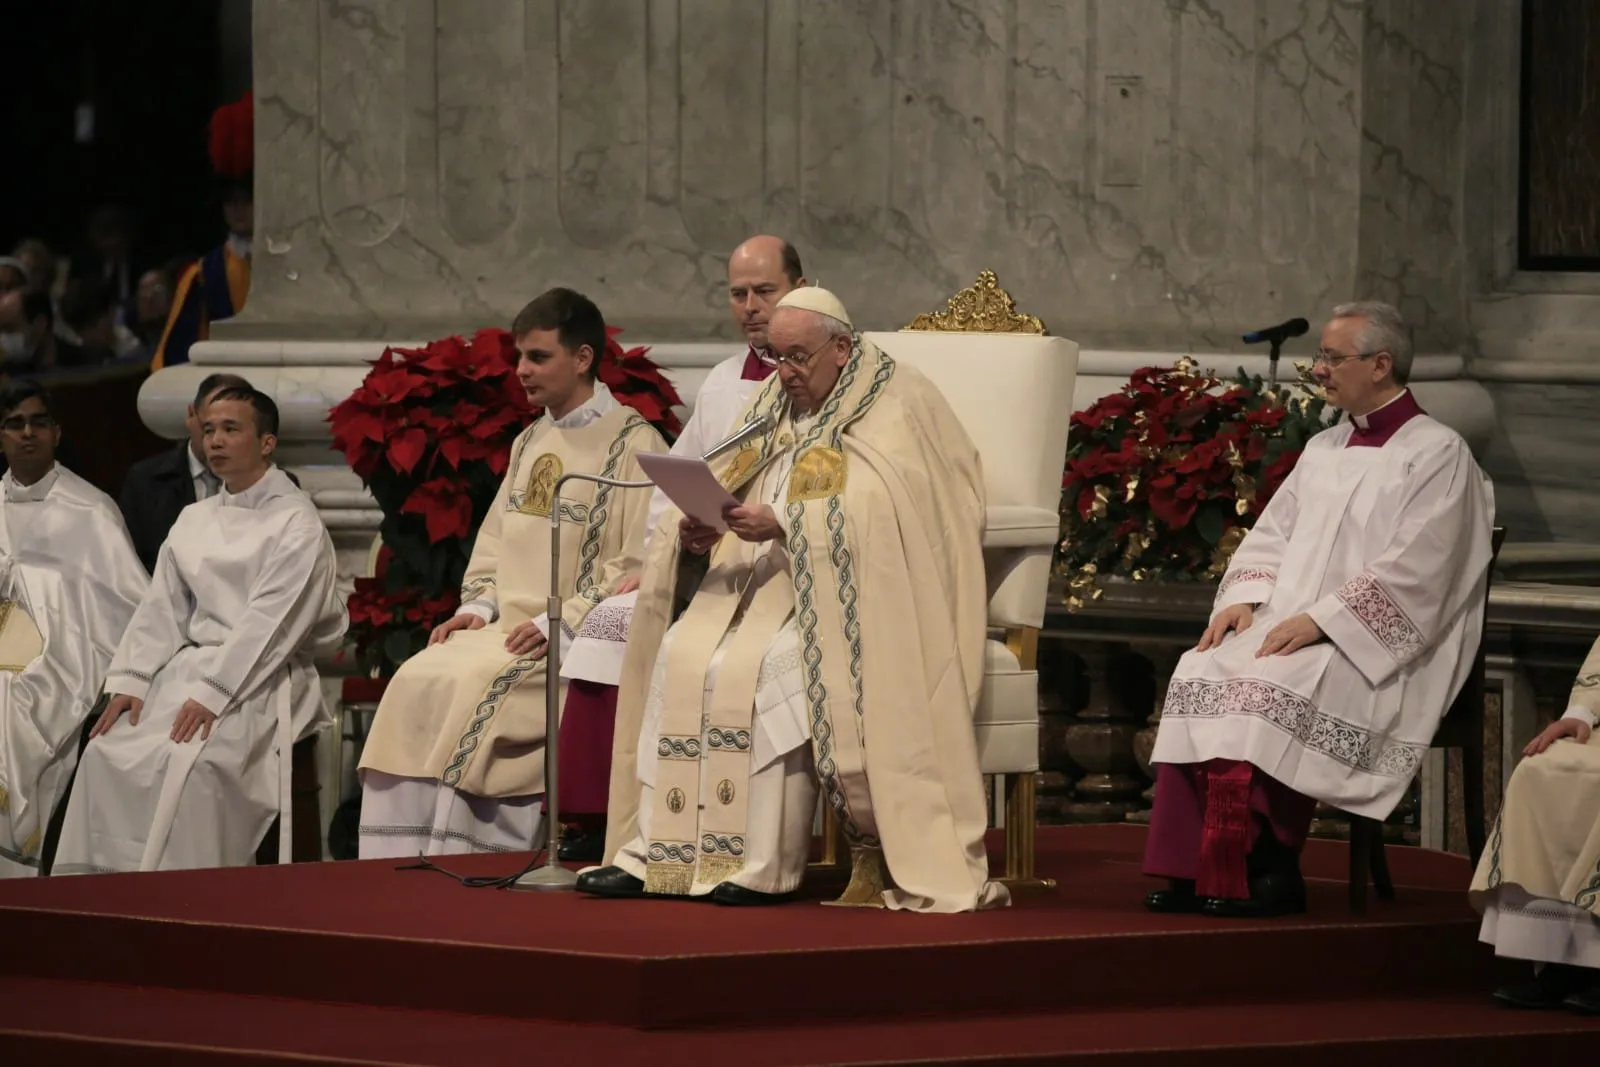 Pope Francis presides over the first papal Mass of the new year on Jan. 1, 2023, in St. Peter's Basilica in Rome.?w=200&h=150